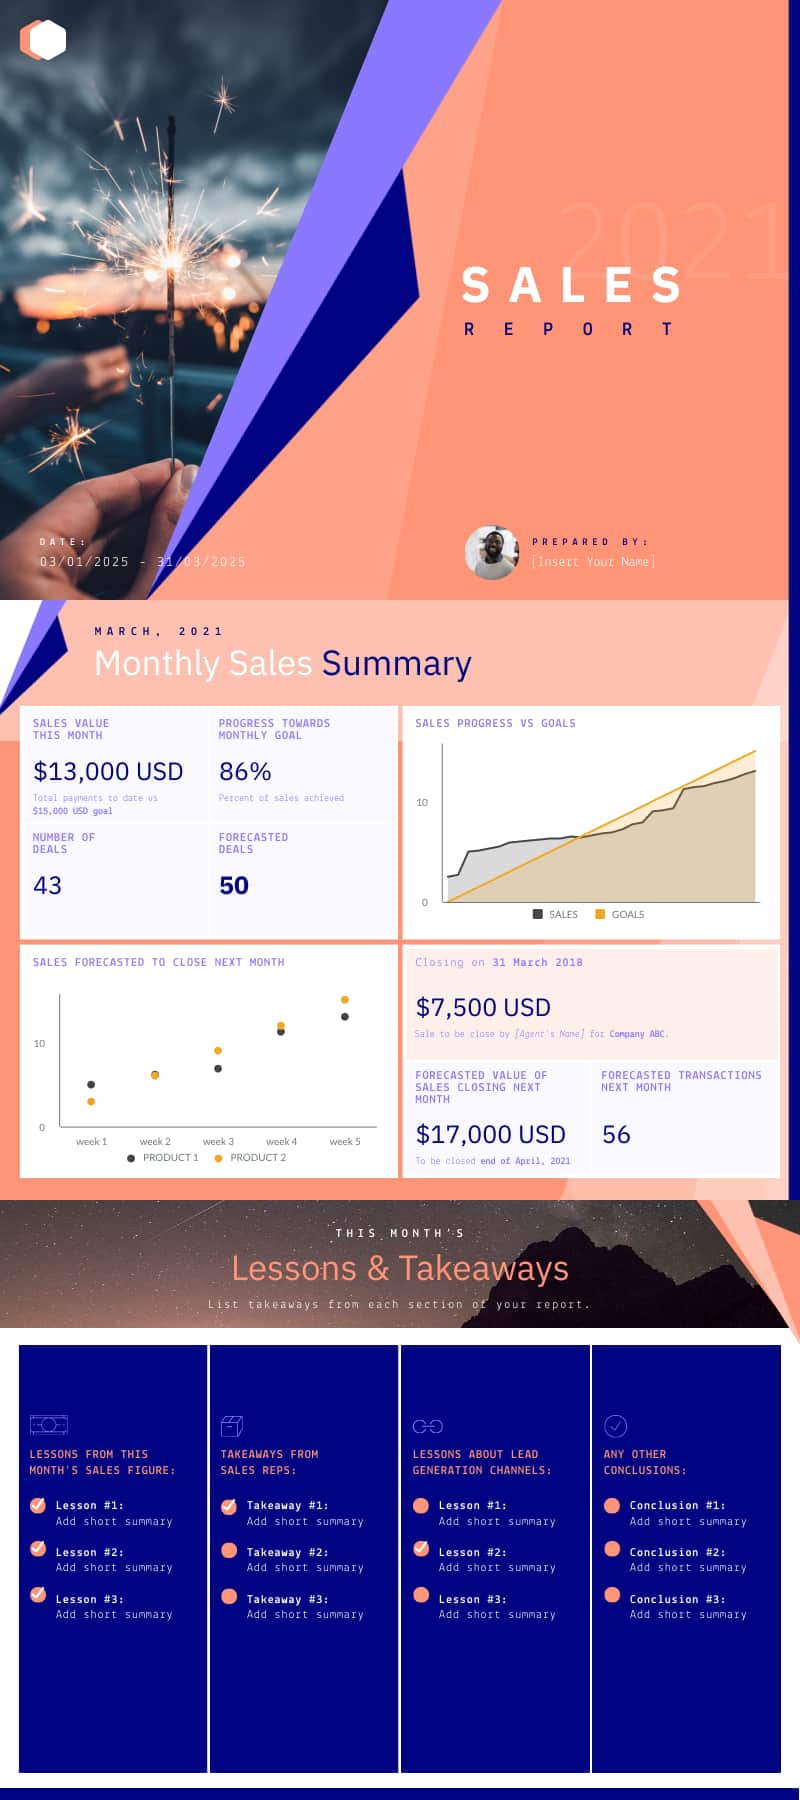 sales report template for expense reports, weekly reports and more 